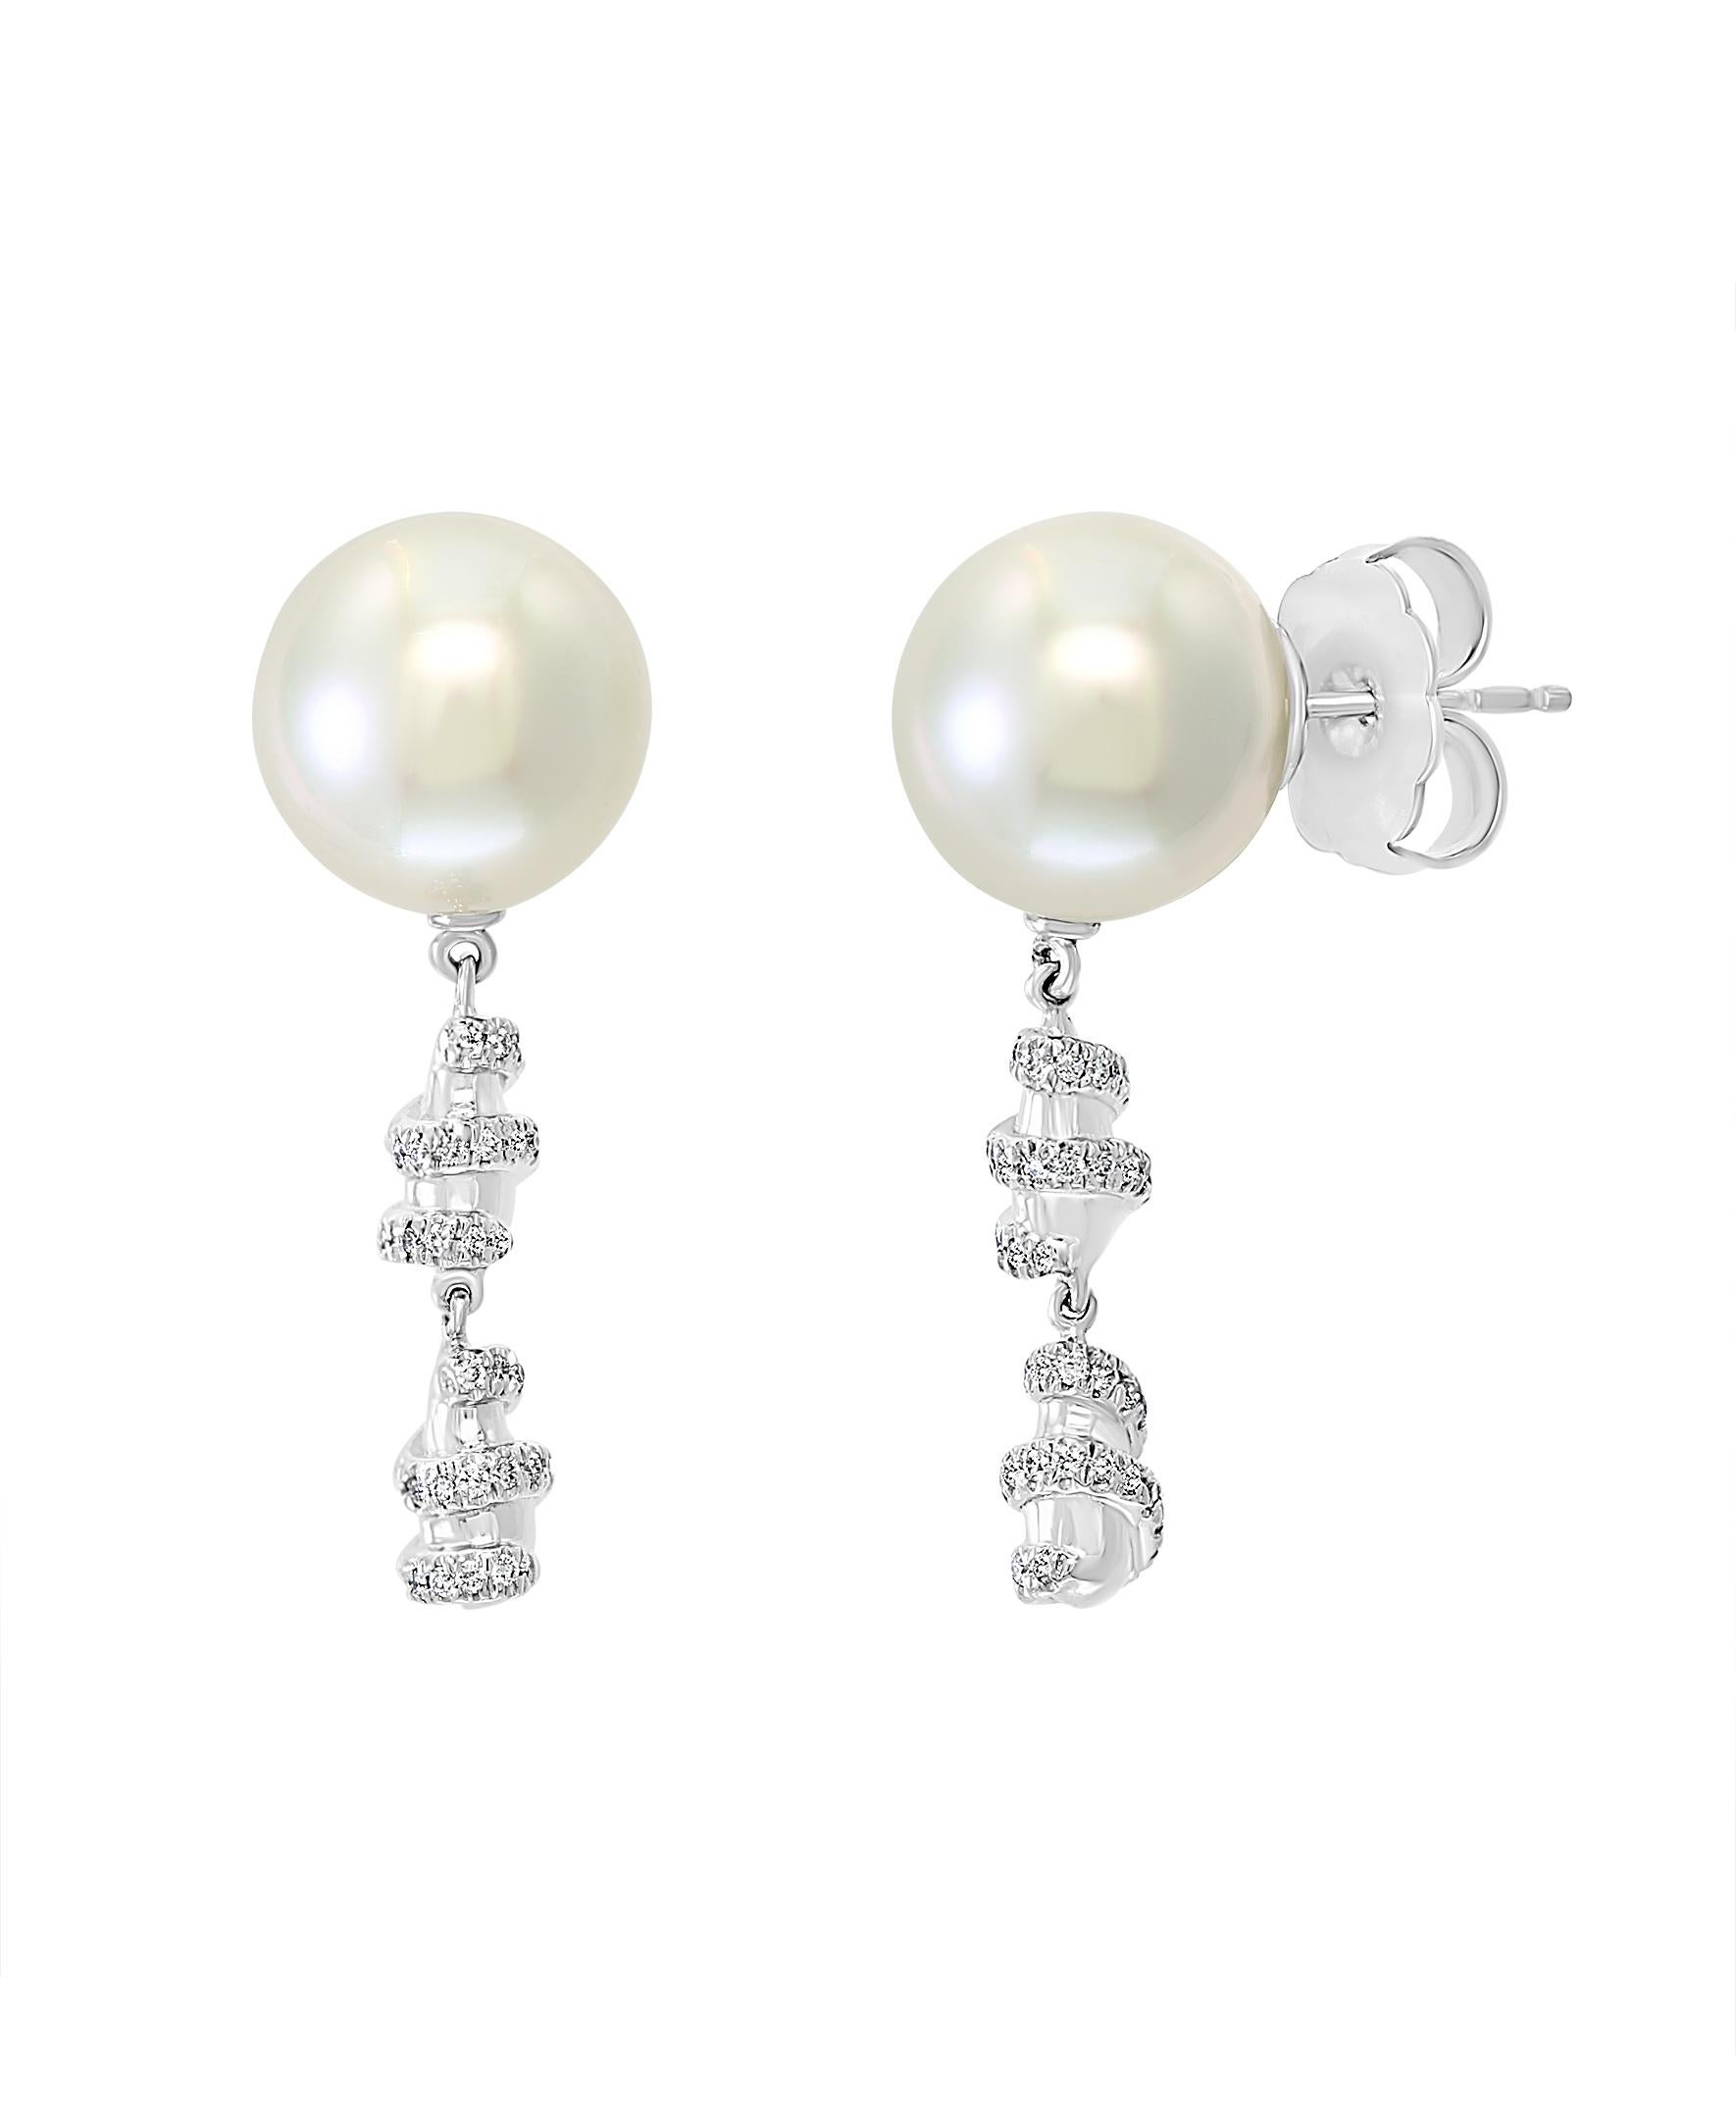 These elegant Diamond and Cultured Pearl earrings feature South Sea white round cultured pearls accentuated by diamonds set in 14k white gold. The classic design of these earrings is perfect for the working woman or for an evening out on the town.
-